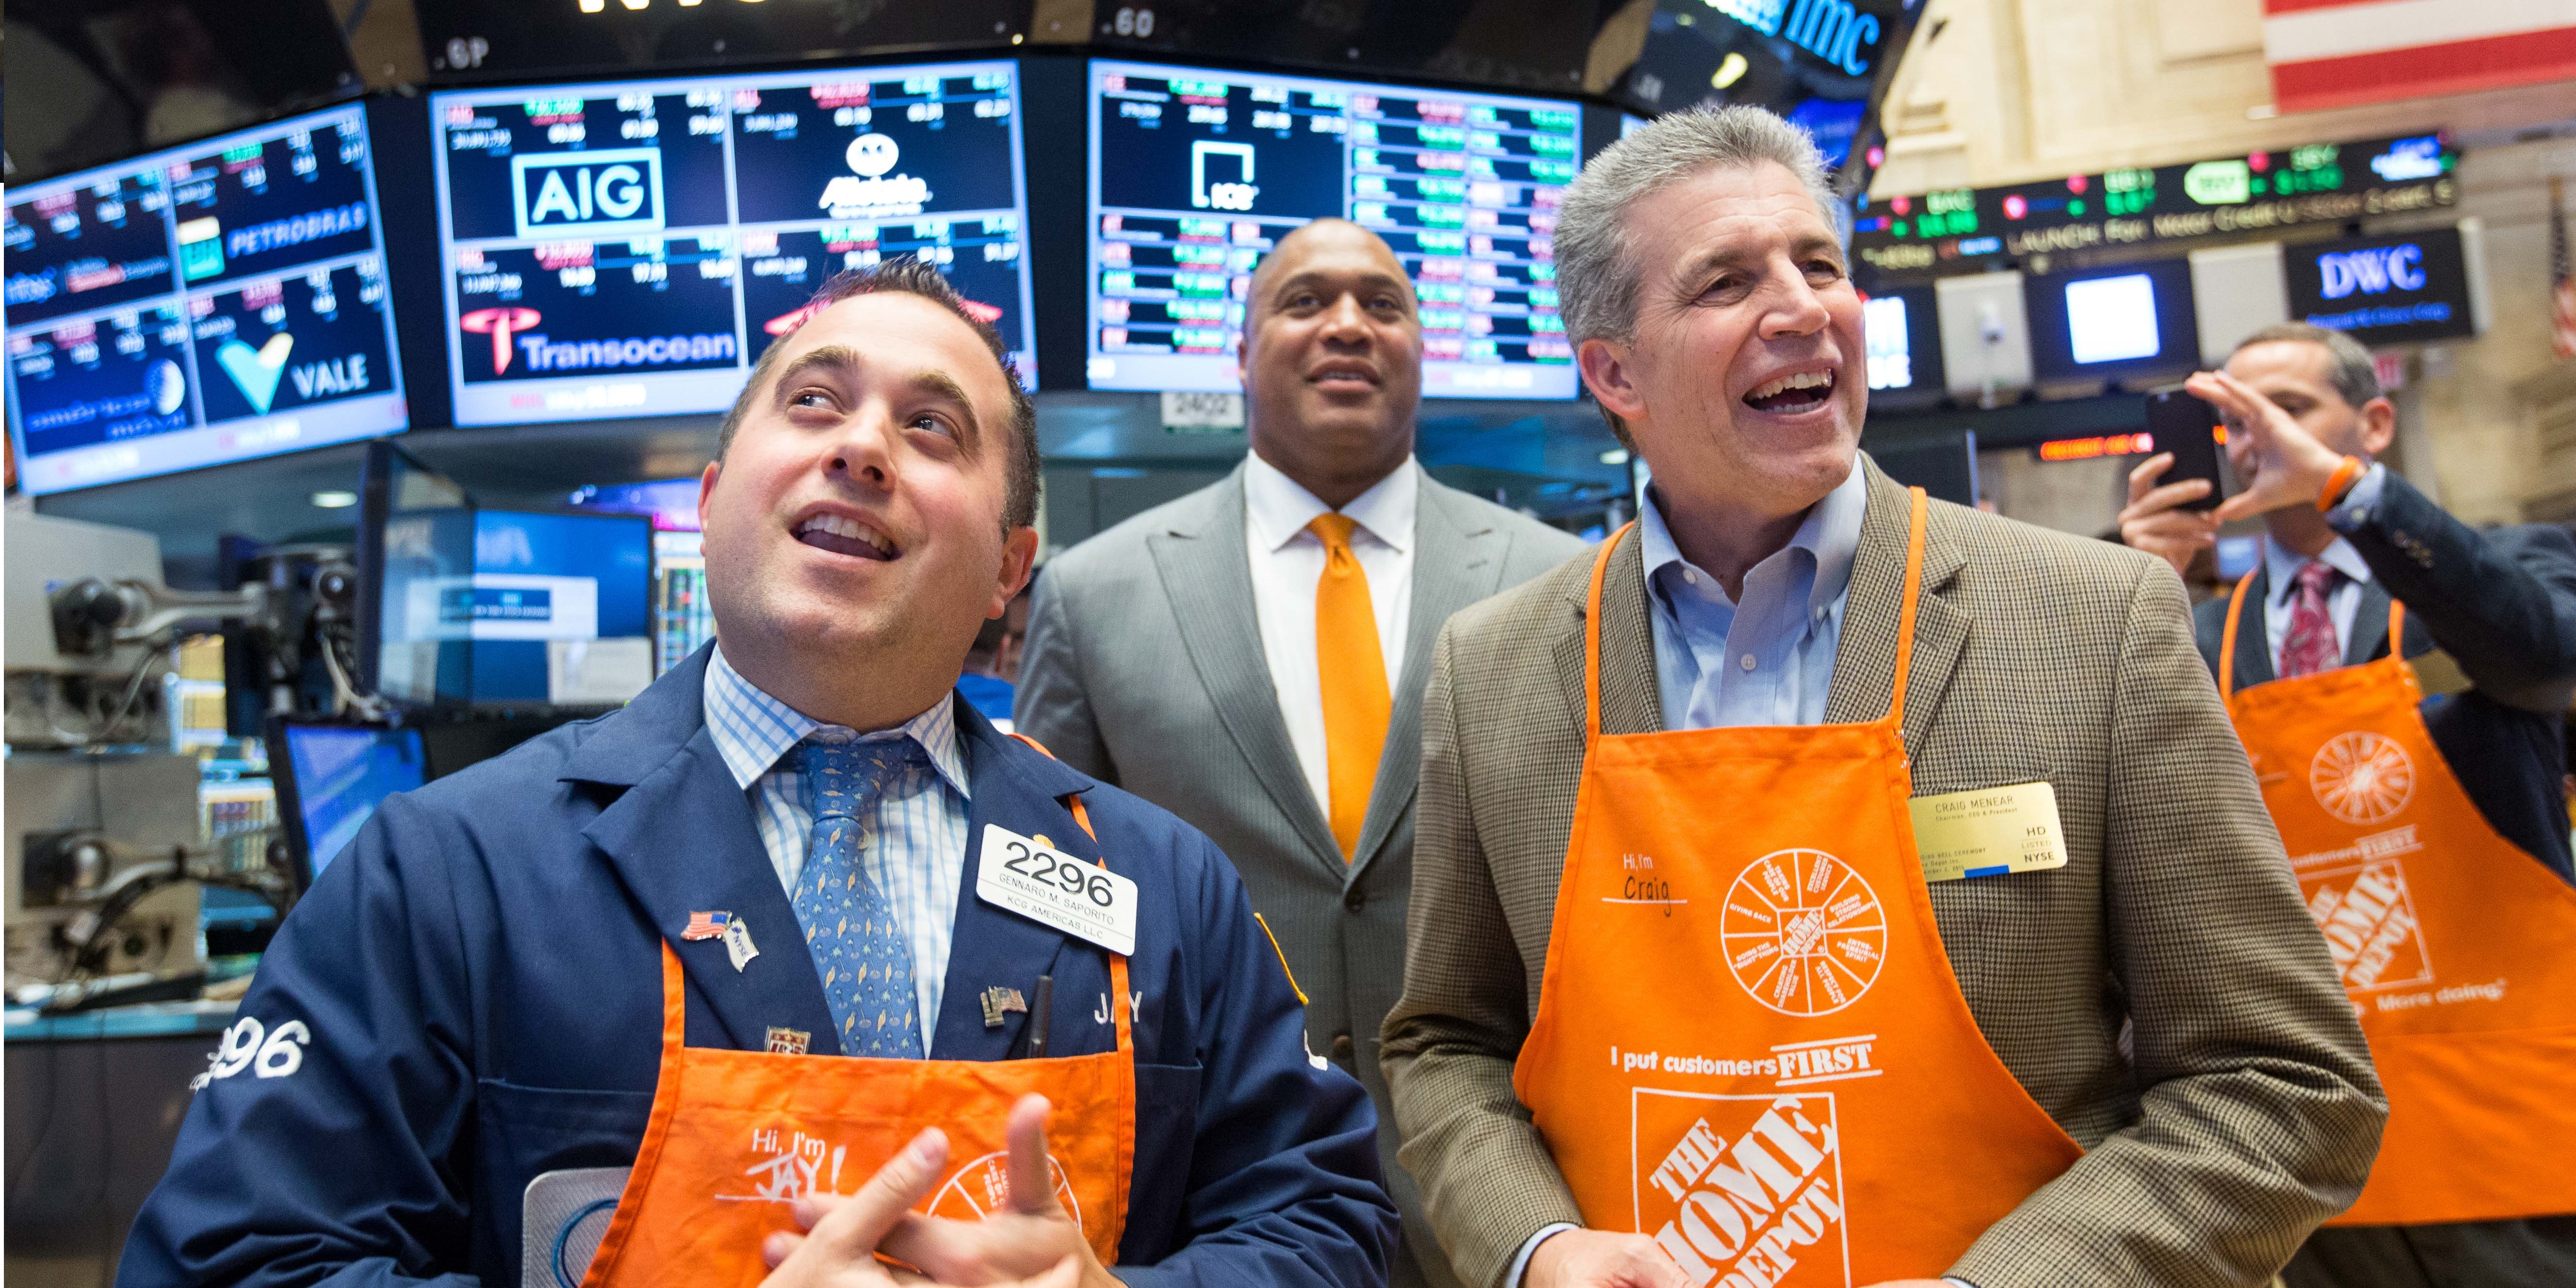 The Home Depot Team Depot Top Vendor Partners Honored with NYSE